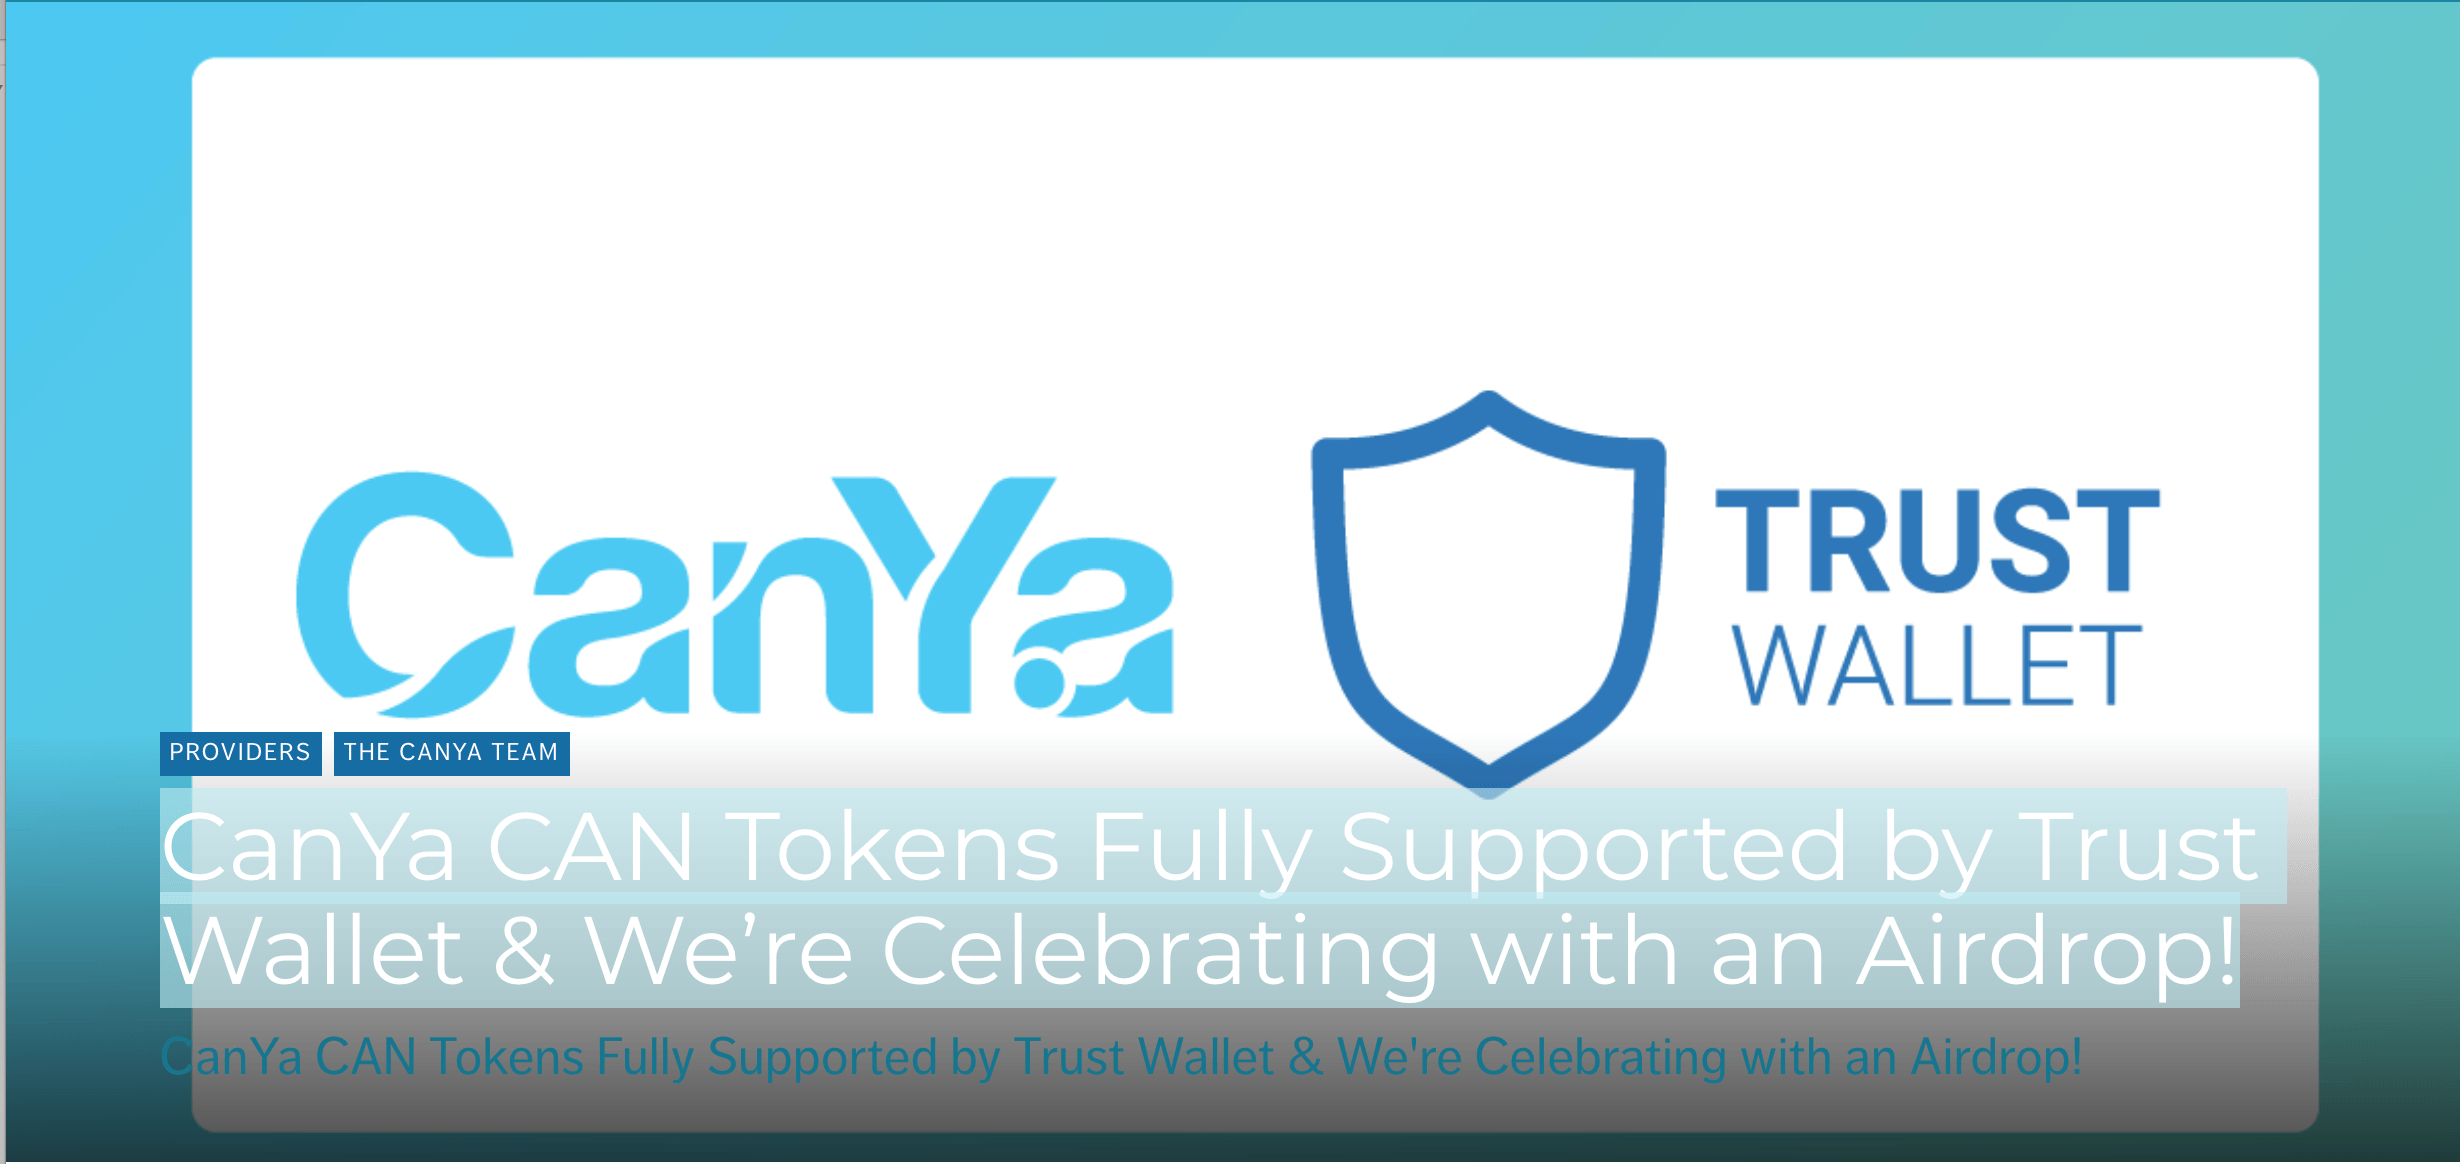 QQ Wallet Logo - CanYa CAN Tokens Fully Supported by Trust Wallet & We're Celebrating